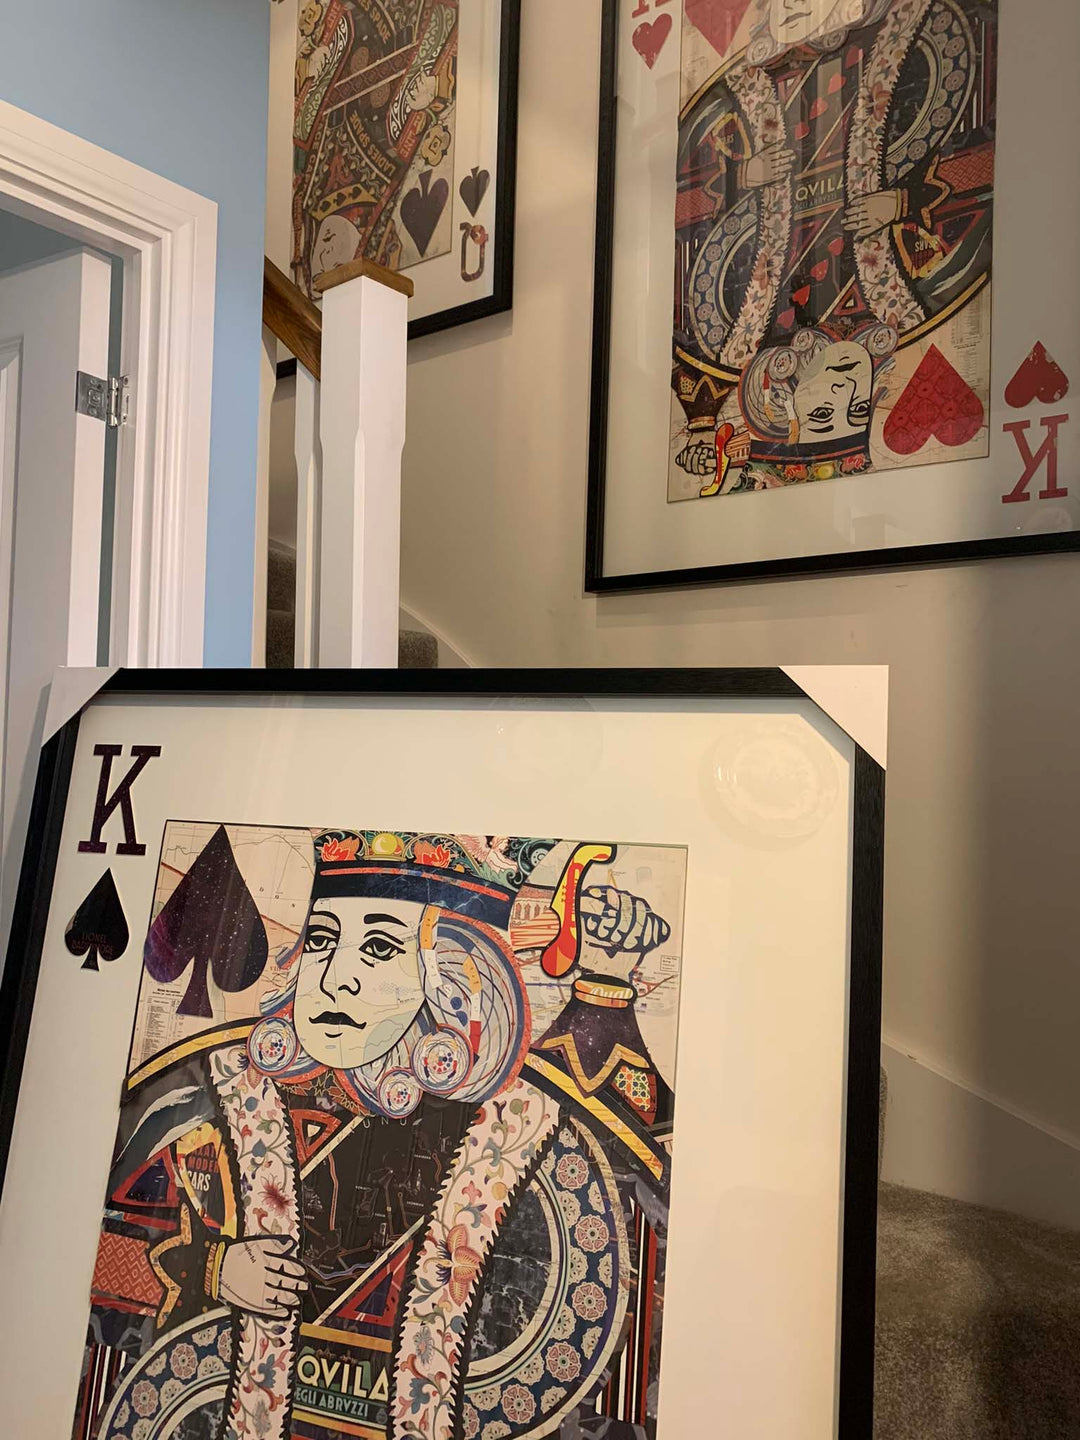 King of Spade Extra Large Collage Wall Art, Playing Card Picture, 100 x 145cm